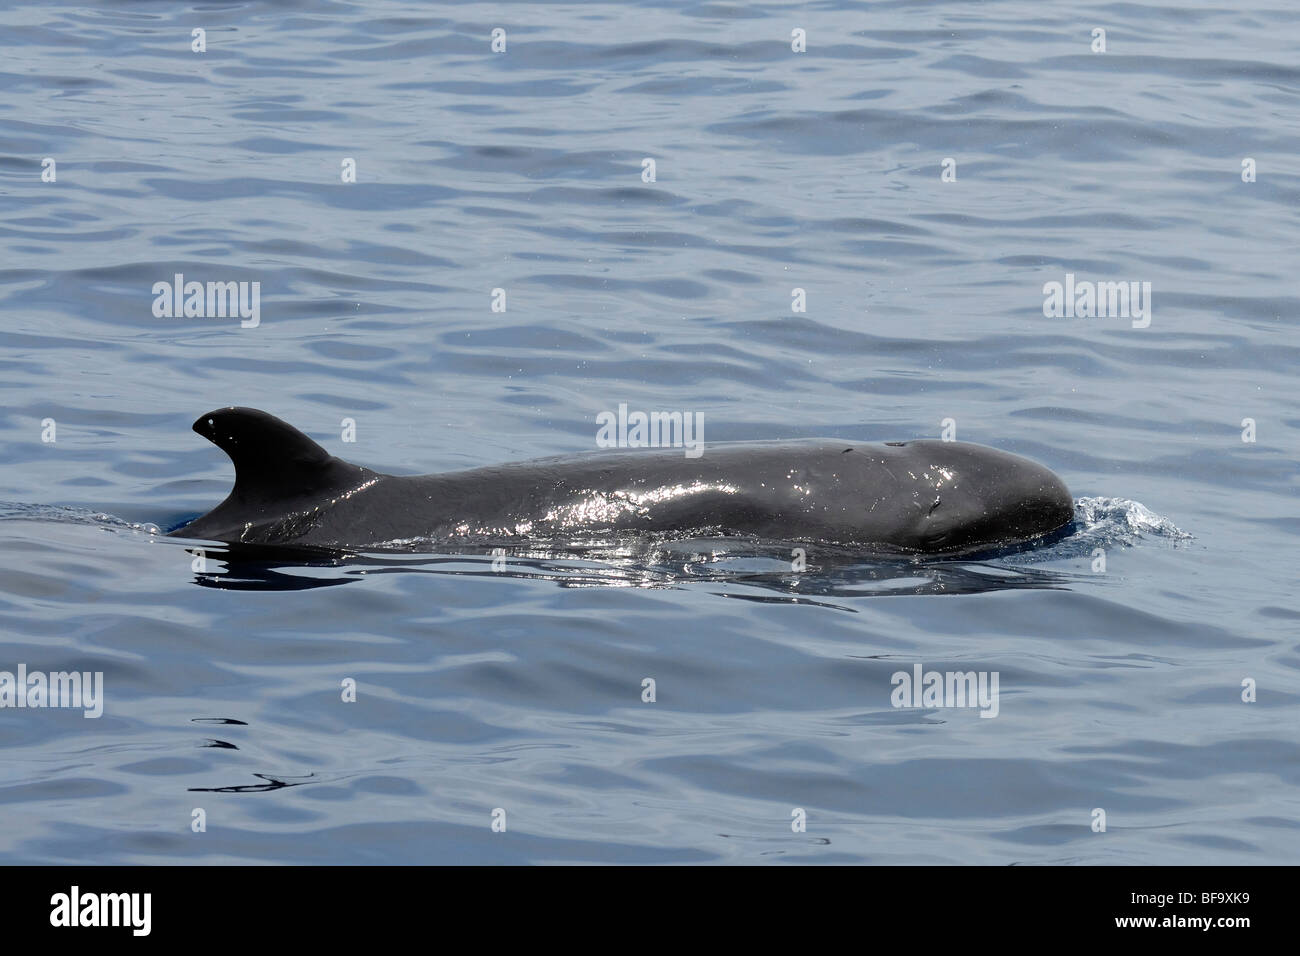 False Killer Whale, Pseudorca crassidens, surfaces right next to whale watch boat, Maldives, Indian Ocean. Stock Photo